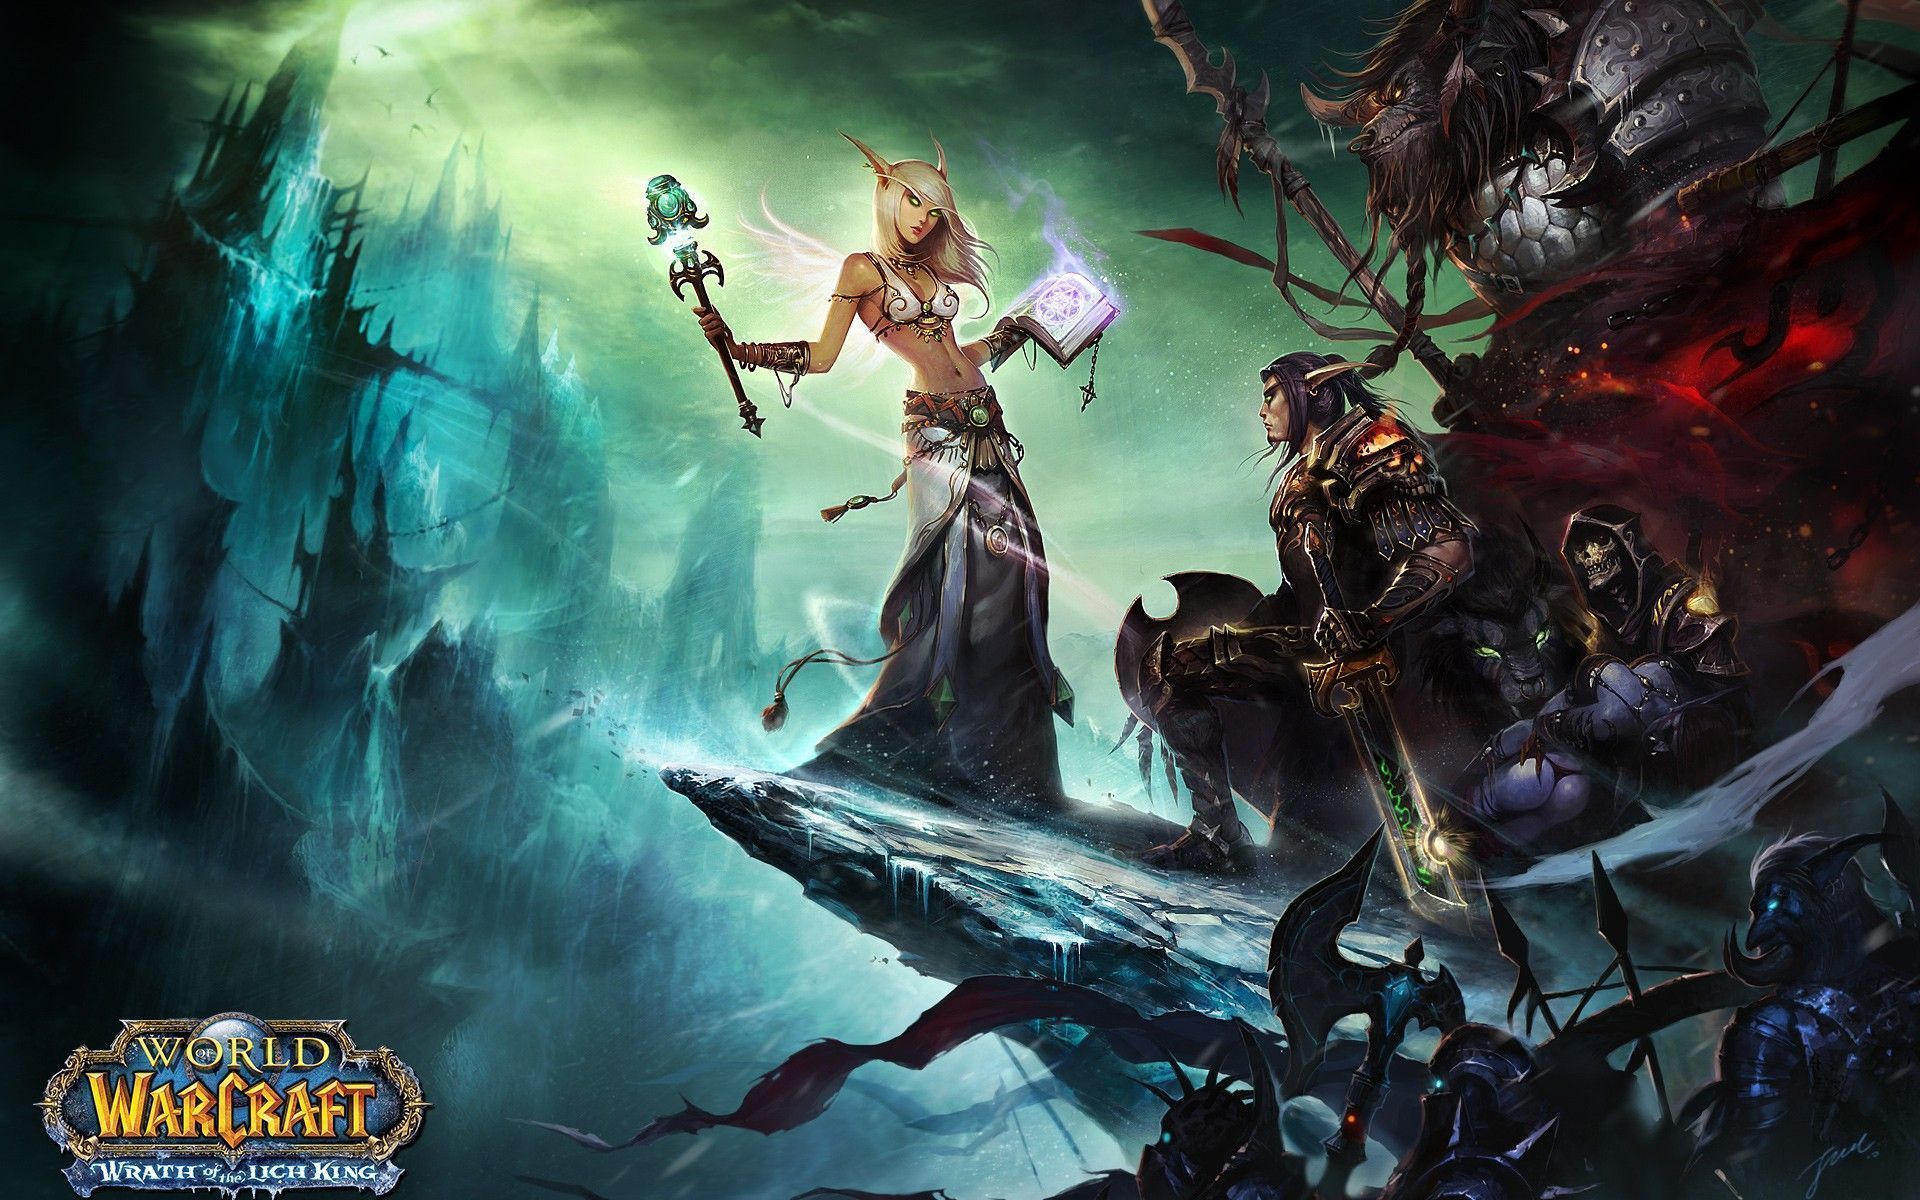 World of Warcraft Wallpaper Backgrounds High Definition Wallpapers